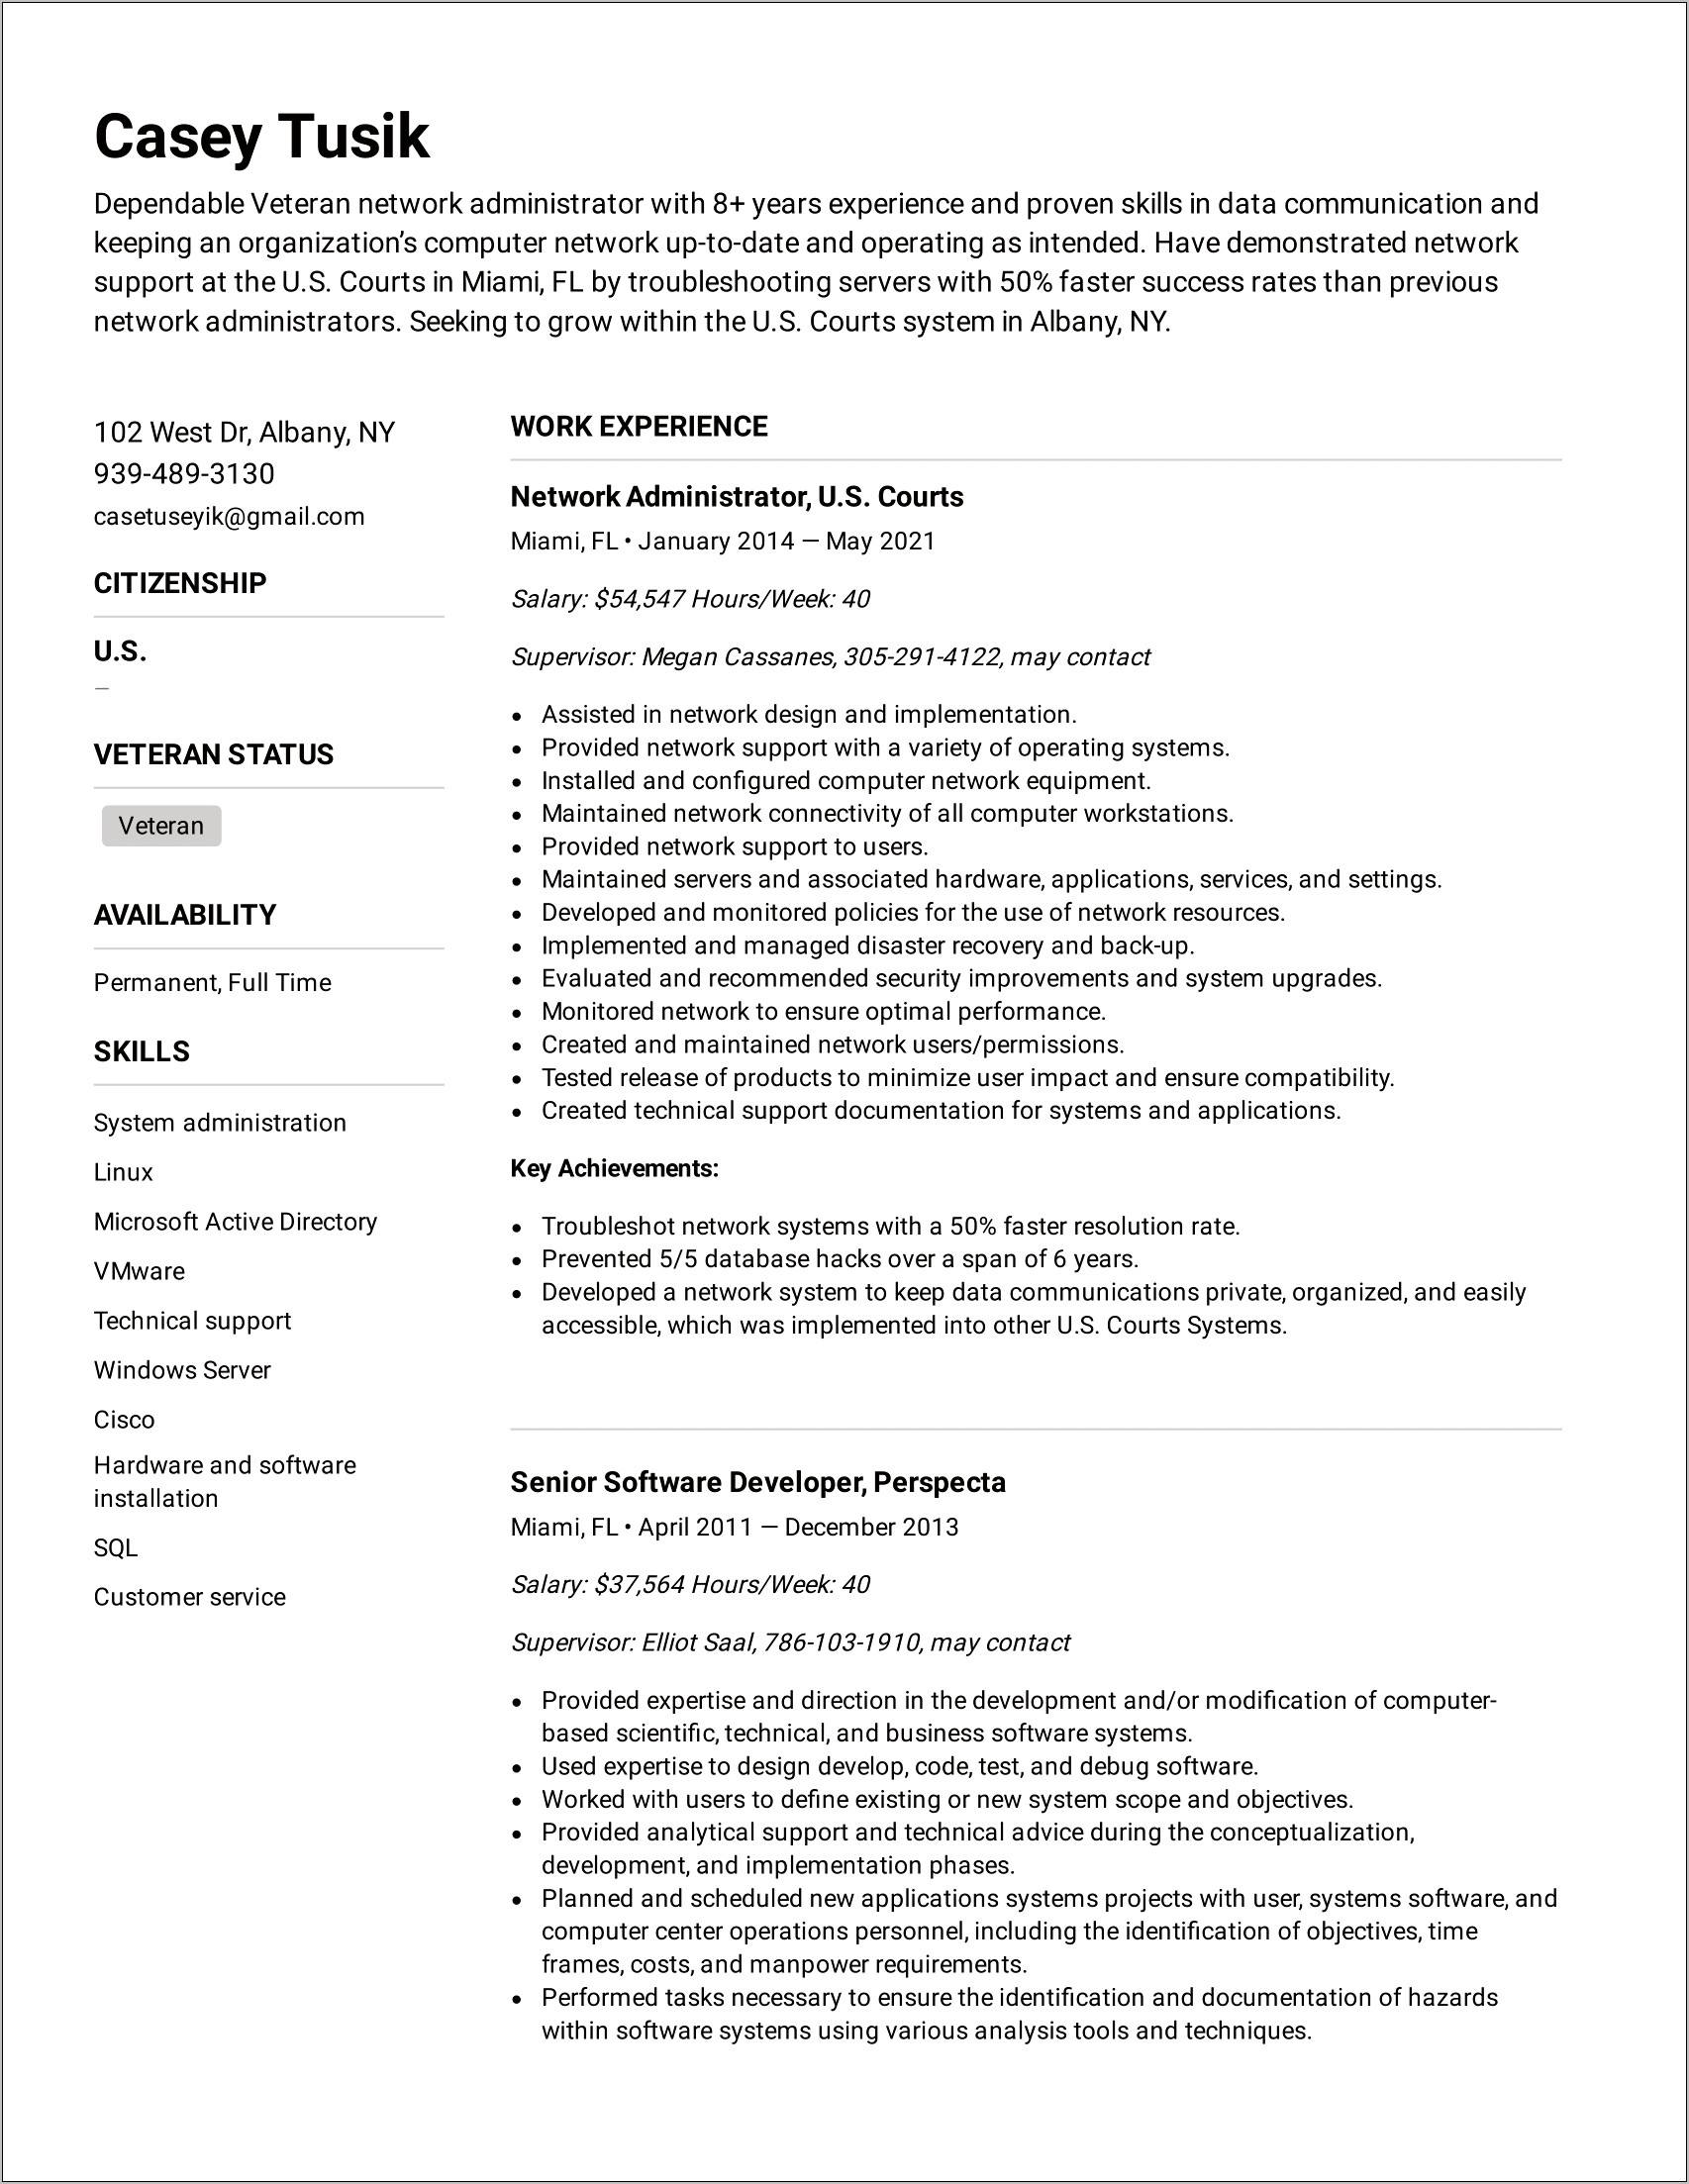 List Of Professional Skills For Federal Resume